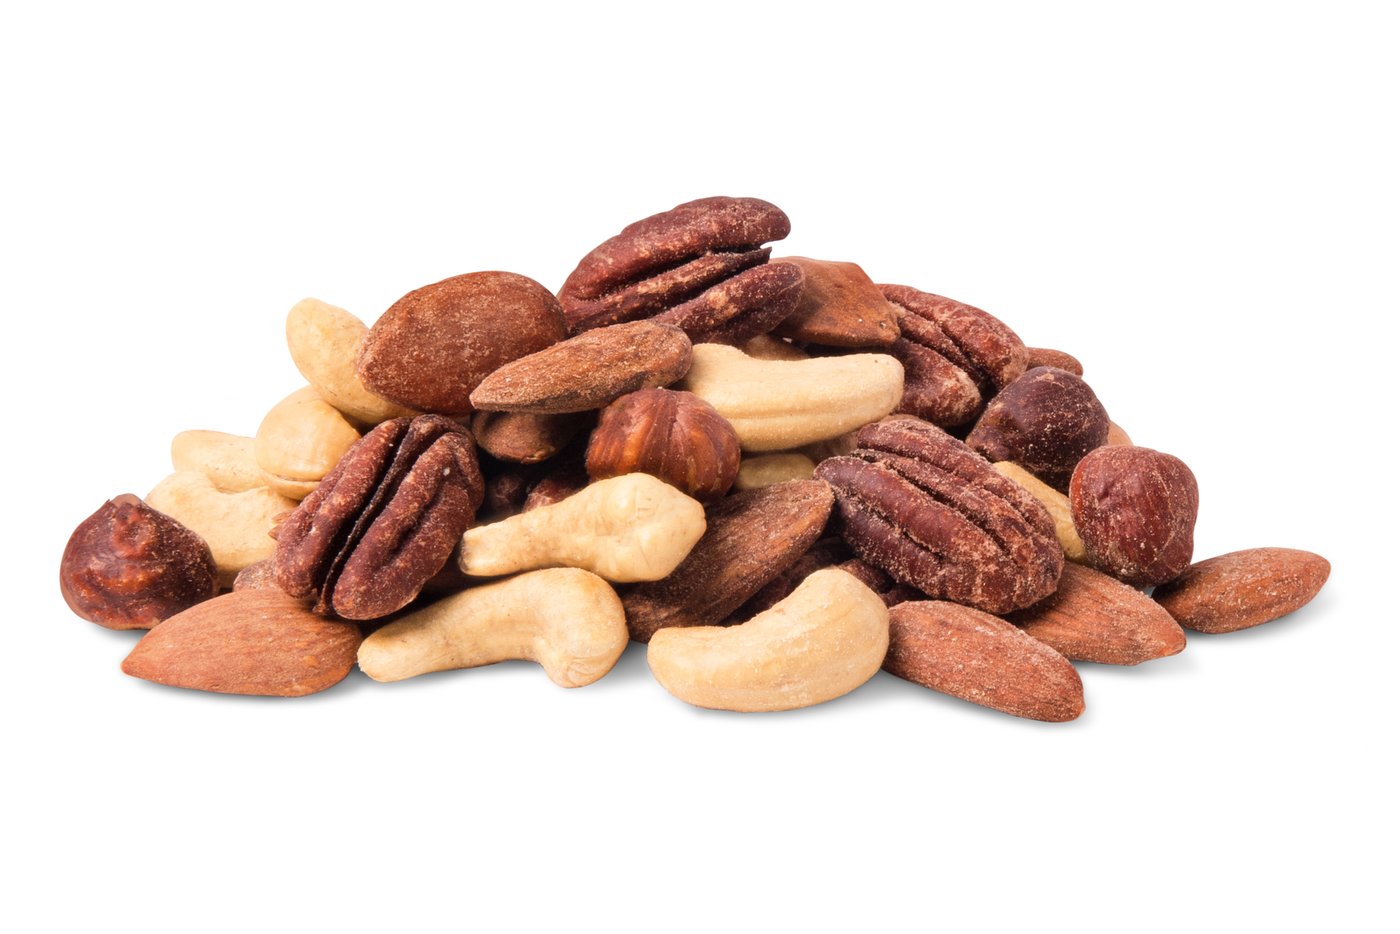 Organic Roasted Mixed Nuts (Salted) image zoom